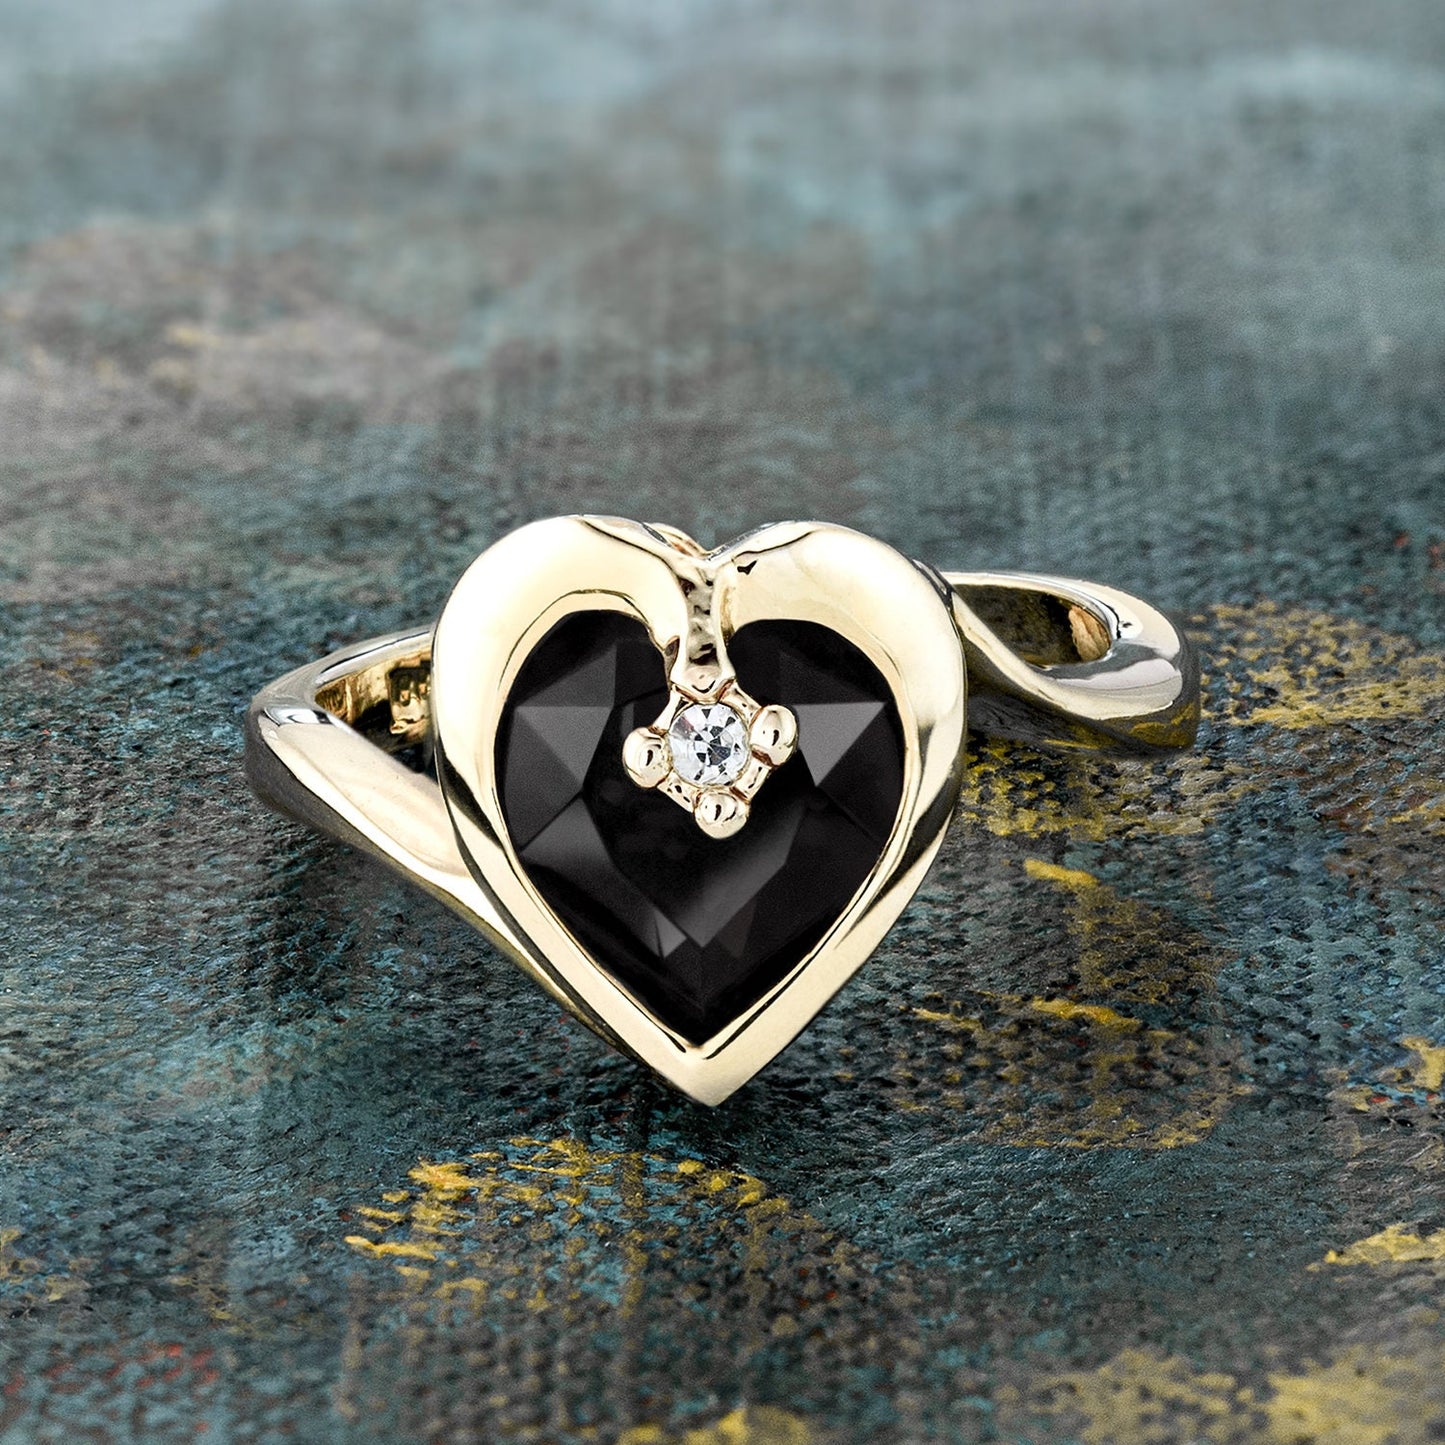 Vintage Ring 1970s Heart Shape Ring with Jet Black Swarovski Crystal 18k Gold Antique Womans Jewelry #R1400